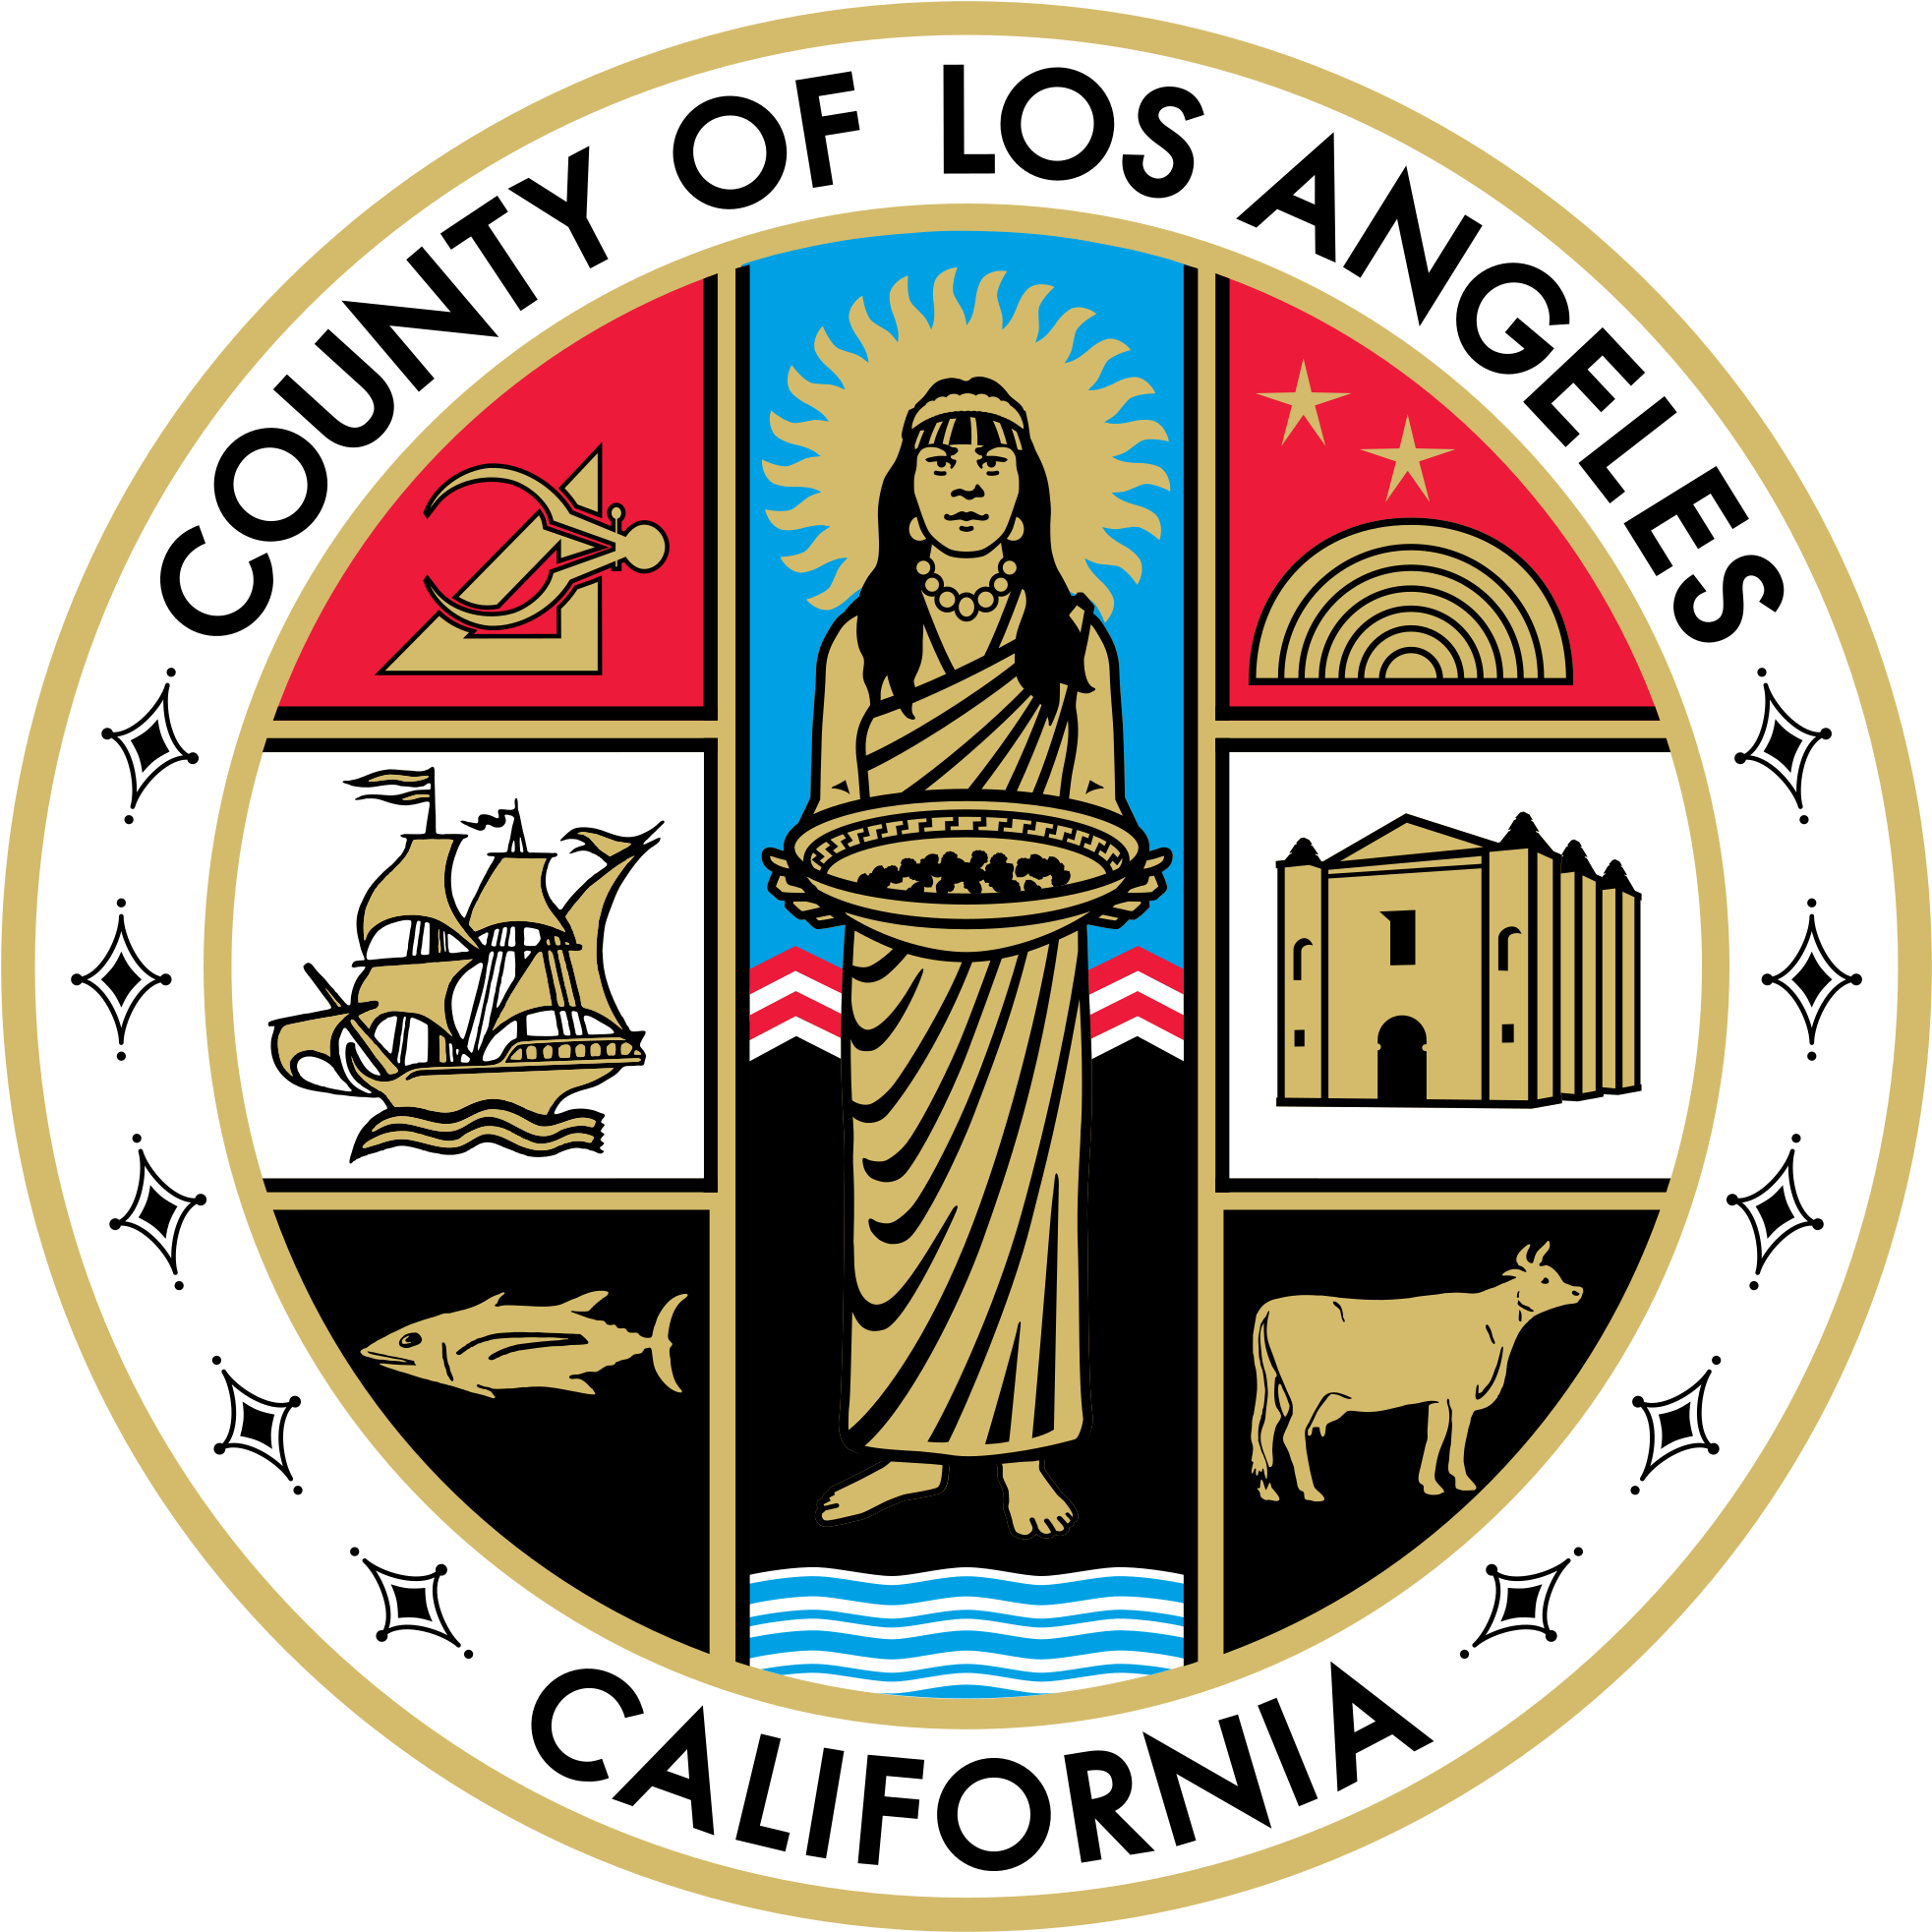 Coat Of Arms Or Logo - County Of Los Angeles Seal (2000x2000)